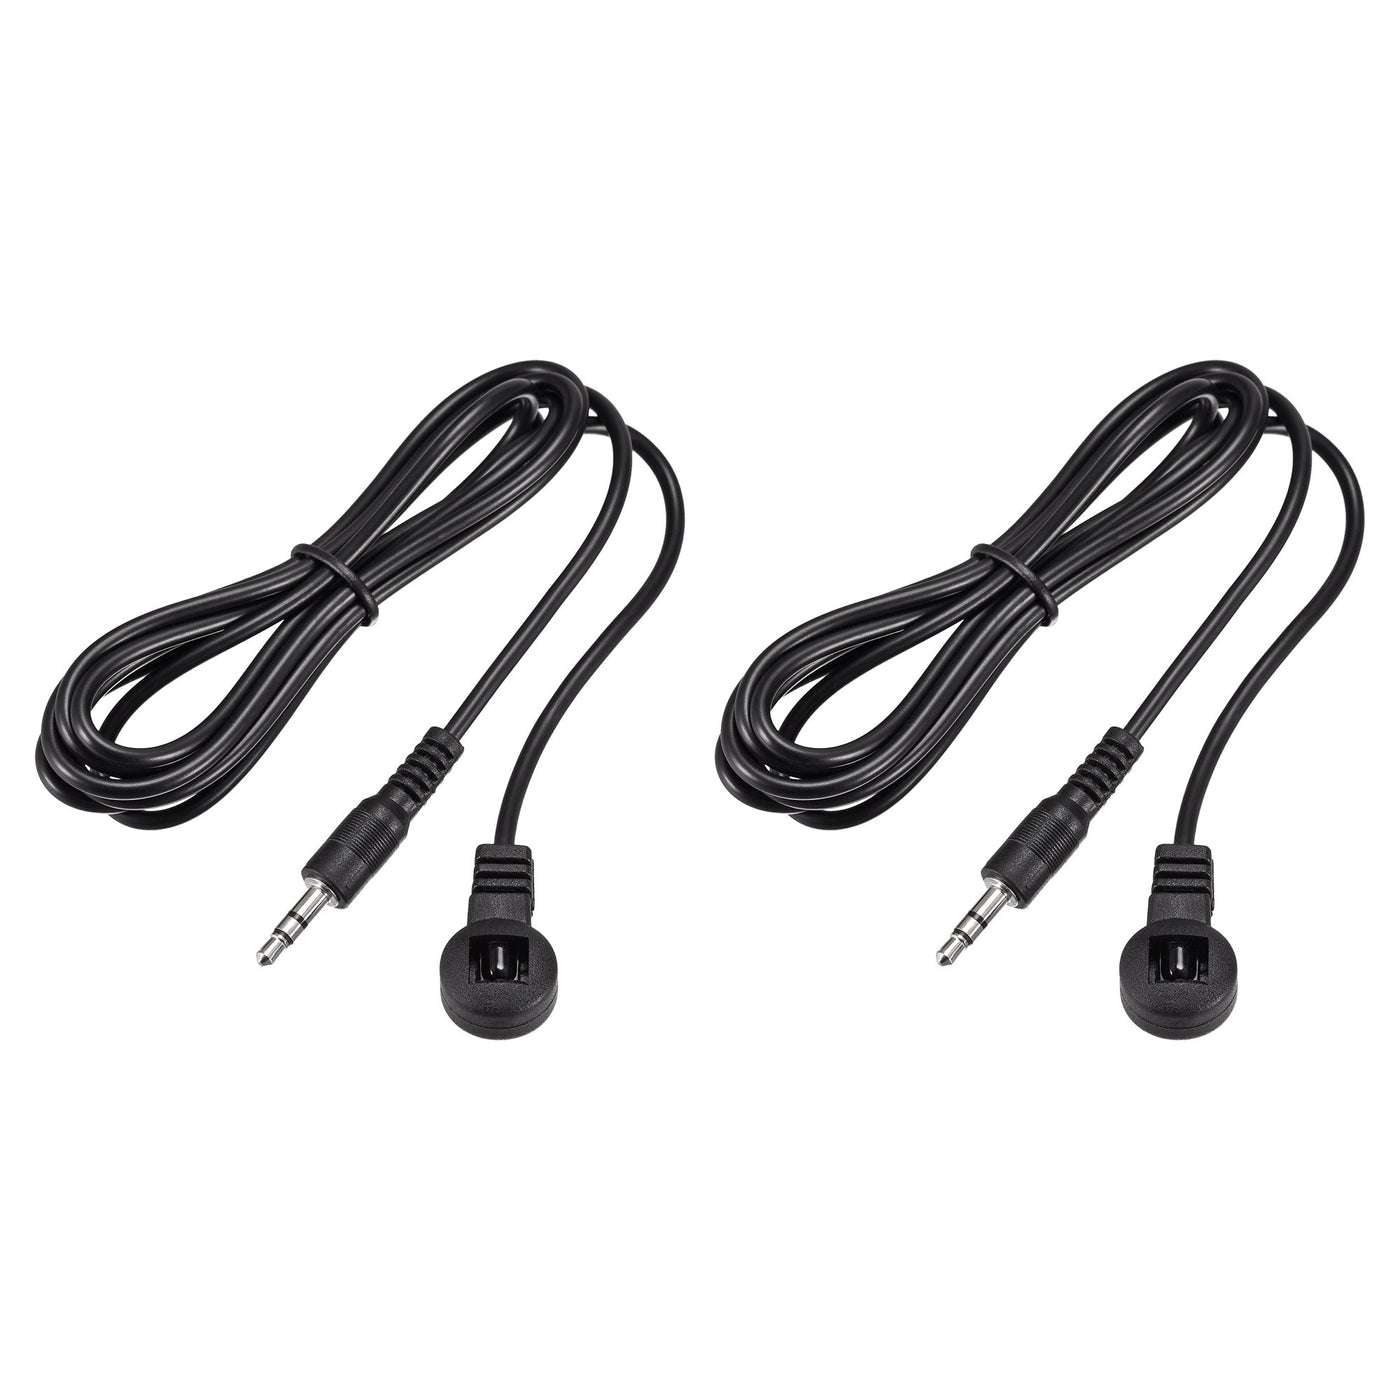 uxcell Uxcell IR Infrared Receiver Extender Cable 3.5mm Jack 4.9FT Long 26FT Receiving Distance Black Flat Head 2pcs